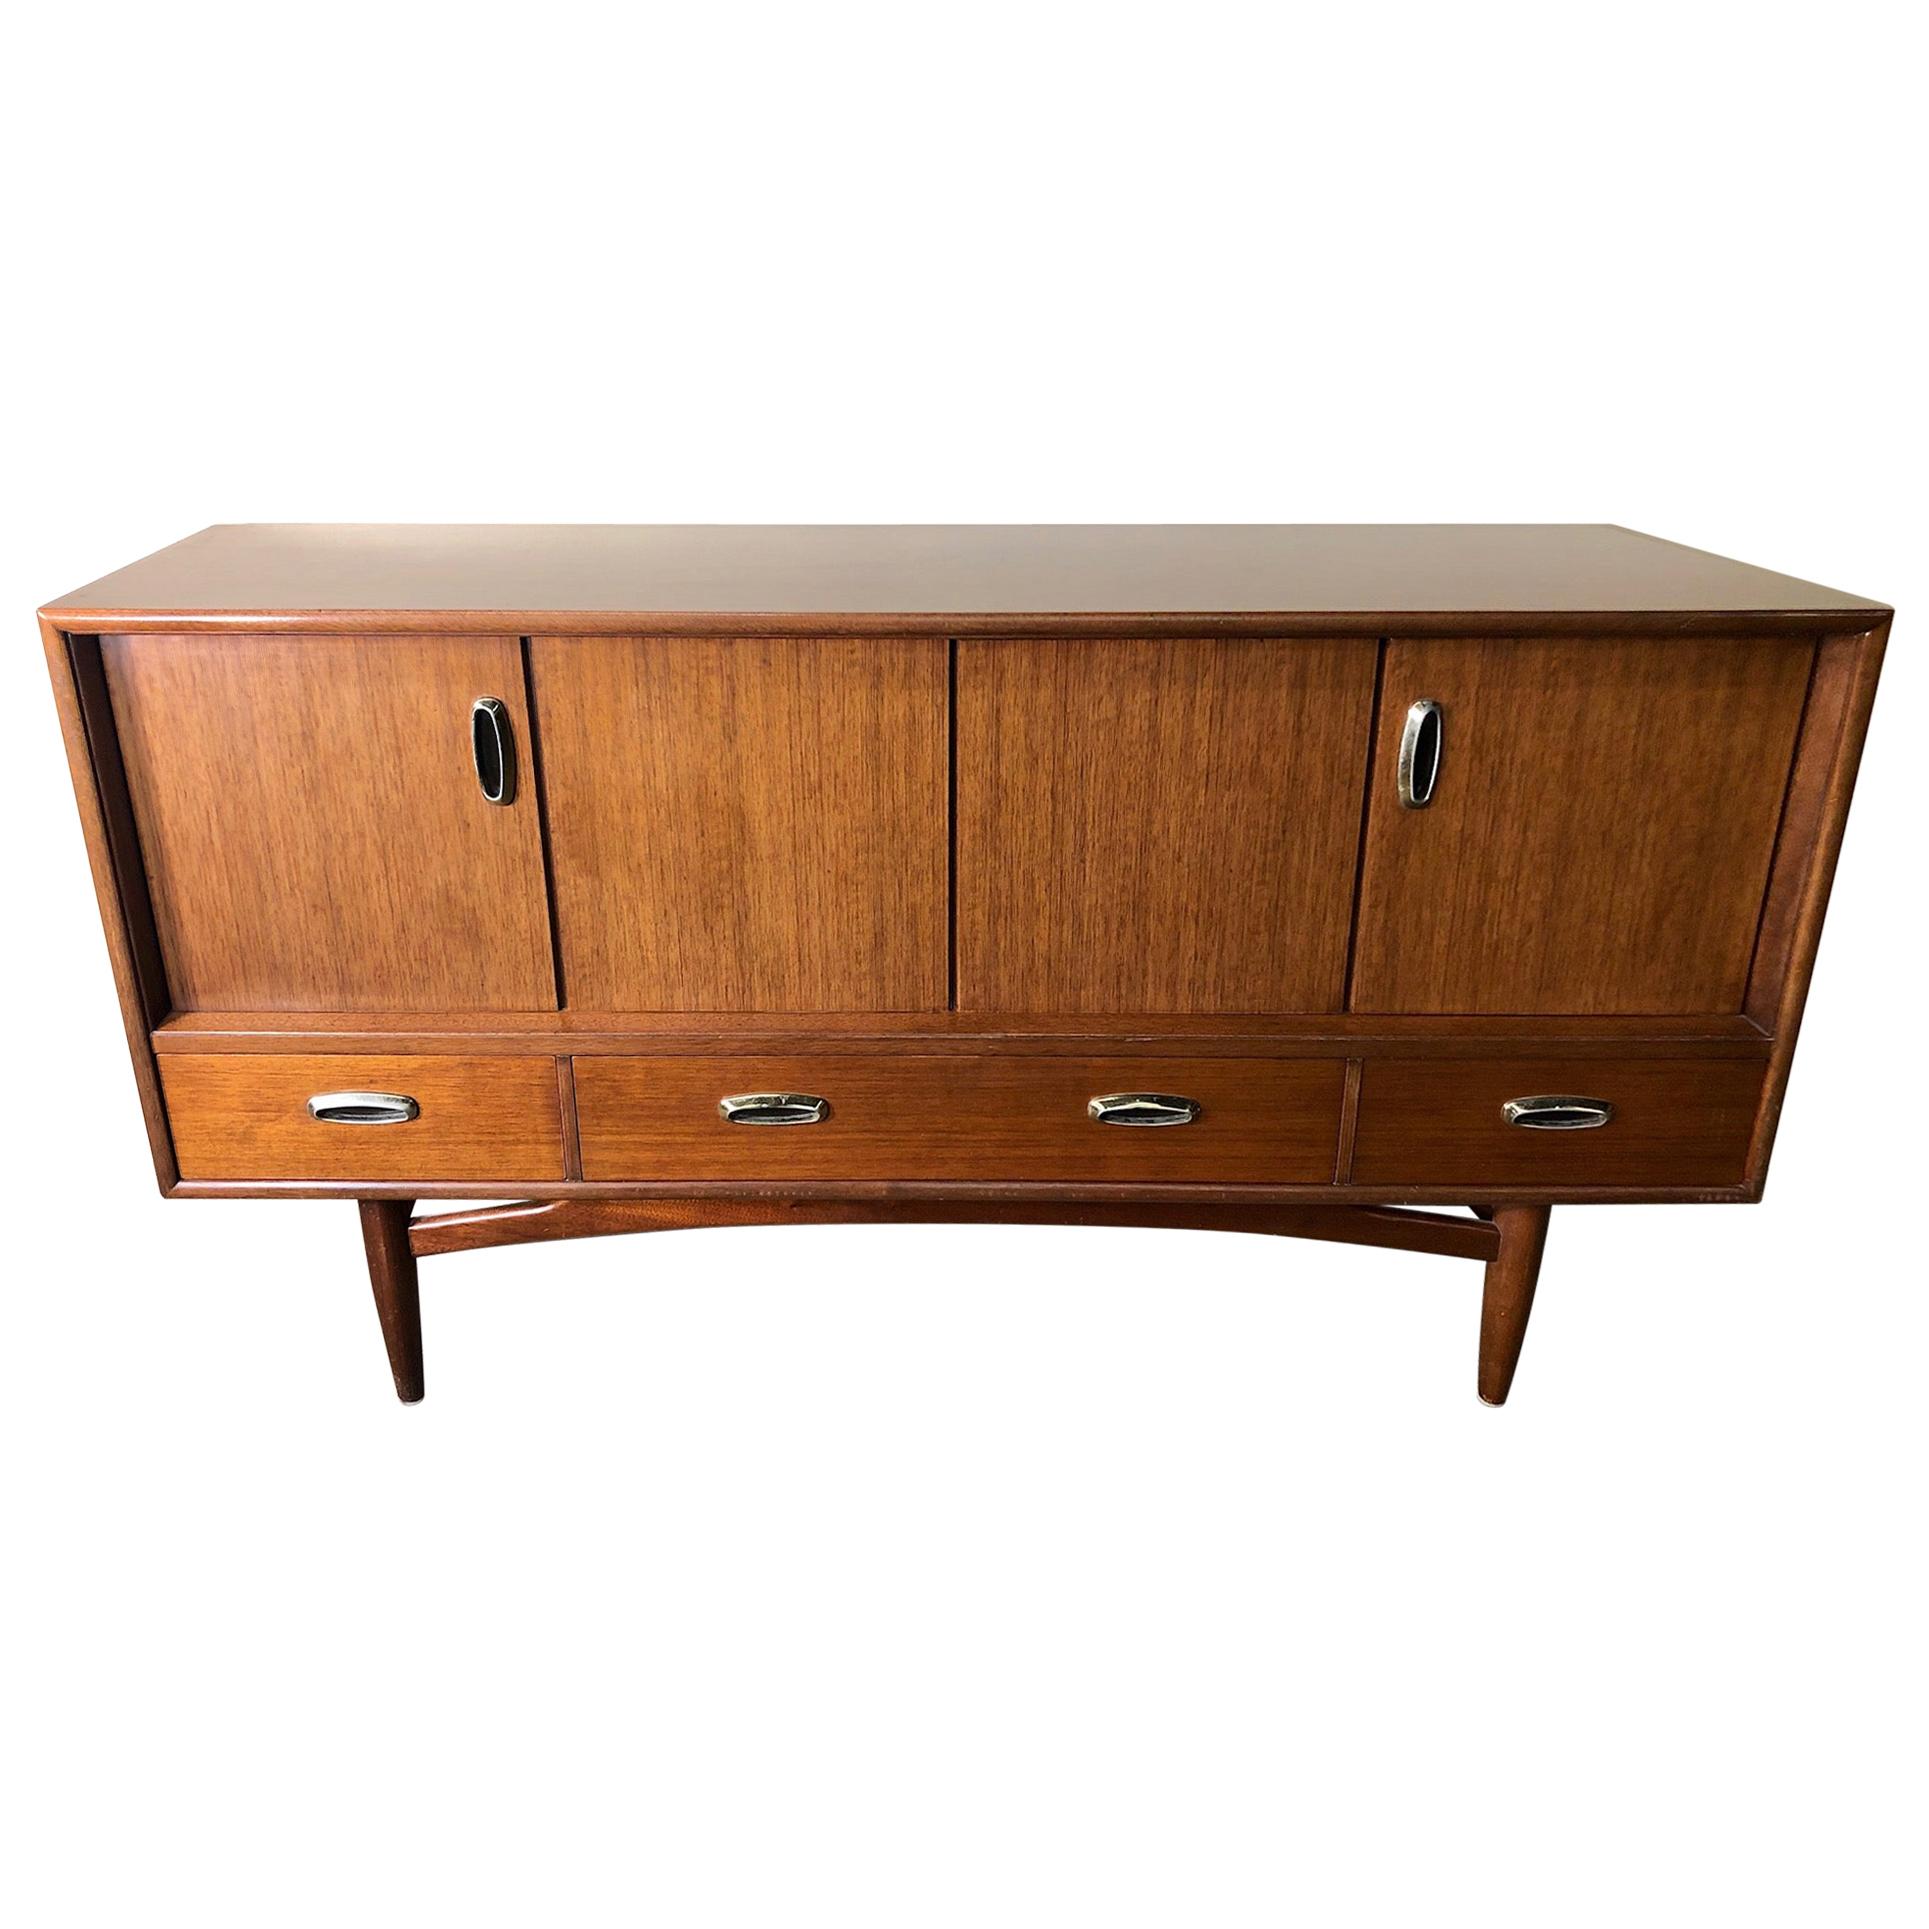 Midcentury Mahogany Credenza Sideboard with Metal Pulls by G Plan For Sale